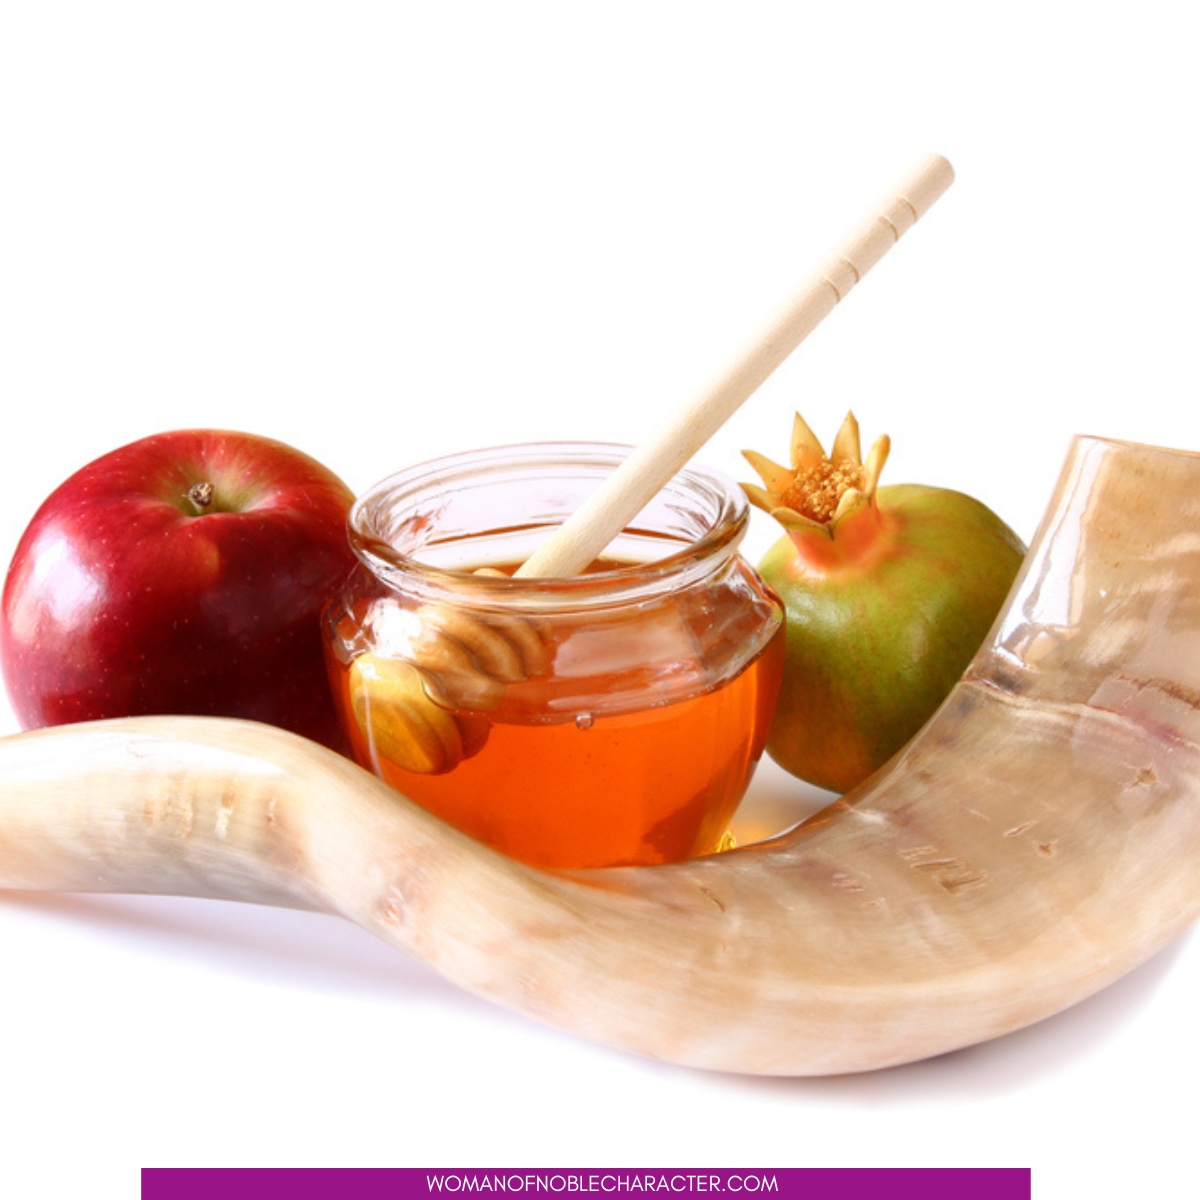 OLD TESTAMENT, HONEY AND POMEGRANATE FOR THE POST 8 Ways How to Celebrate Rosh Hashanah as a Christian